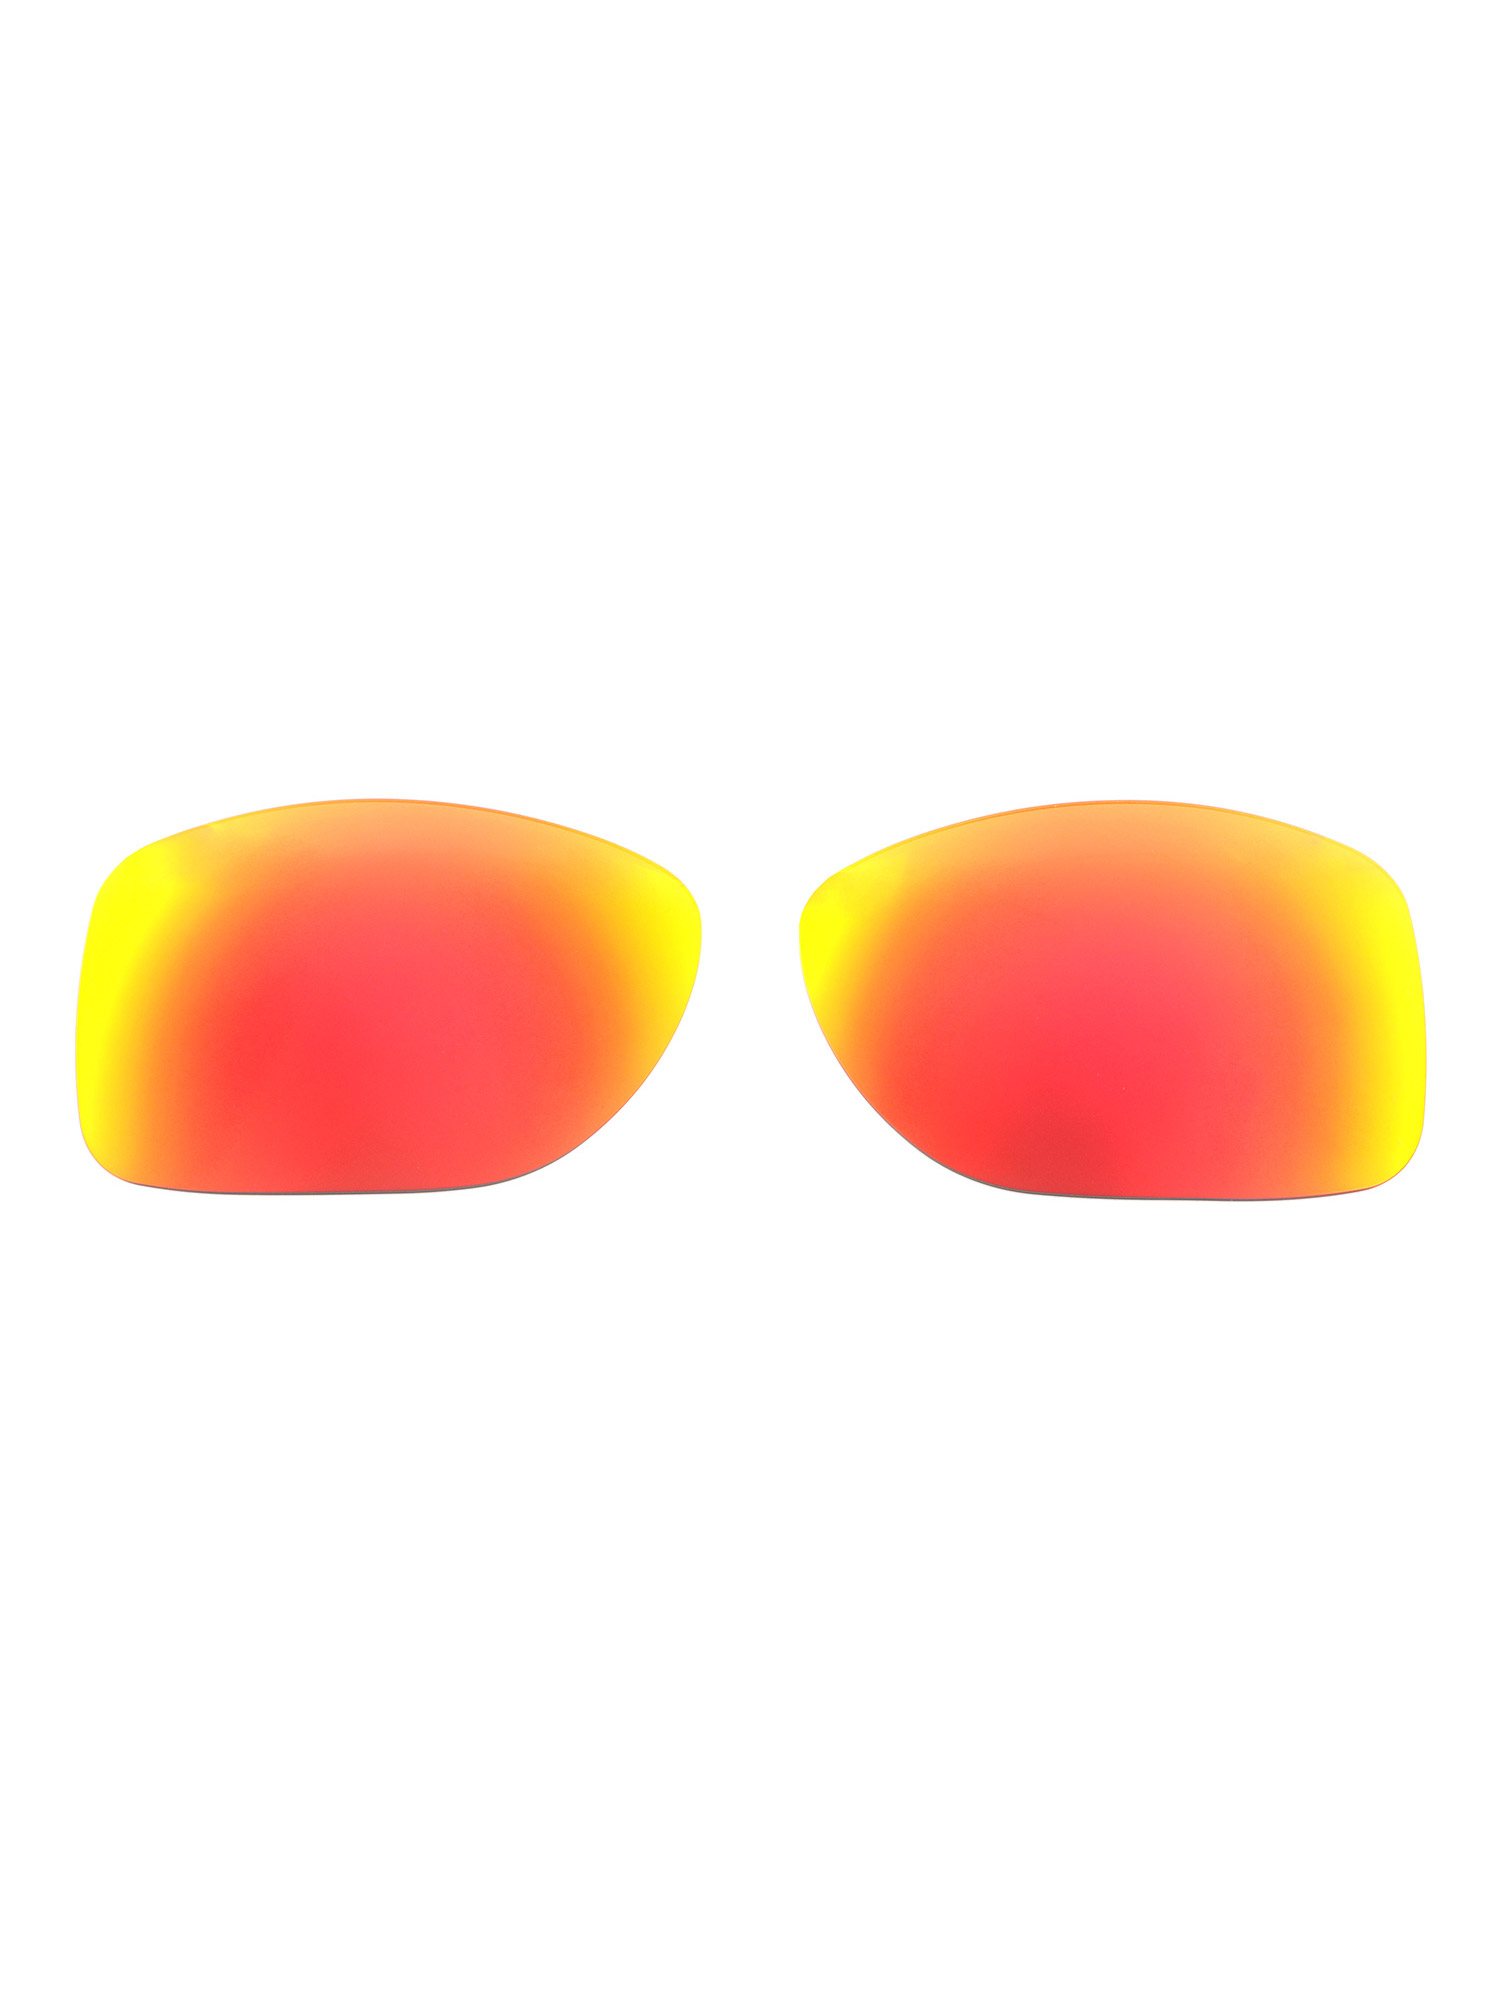 Walleva Fire Red Polarized Replacement Lenses for Oakley Gauge 8 M Sunglasses - image 1 of 7